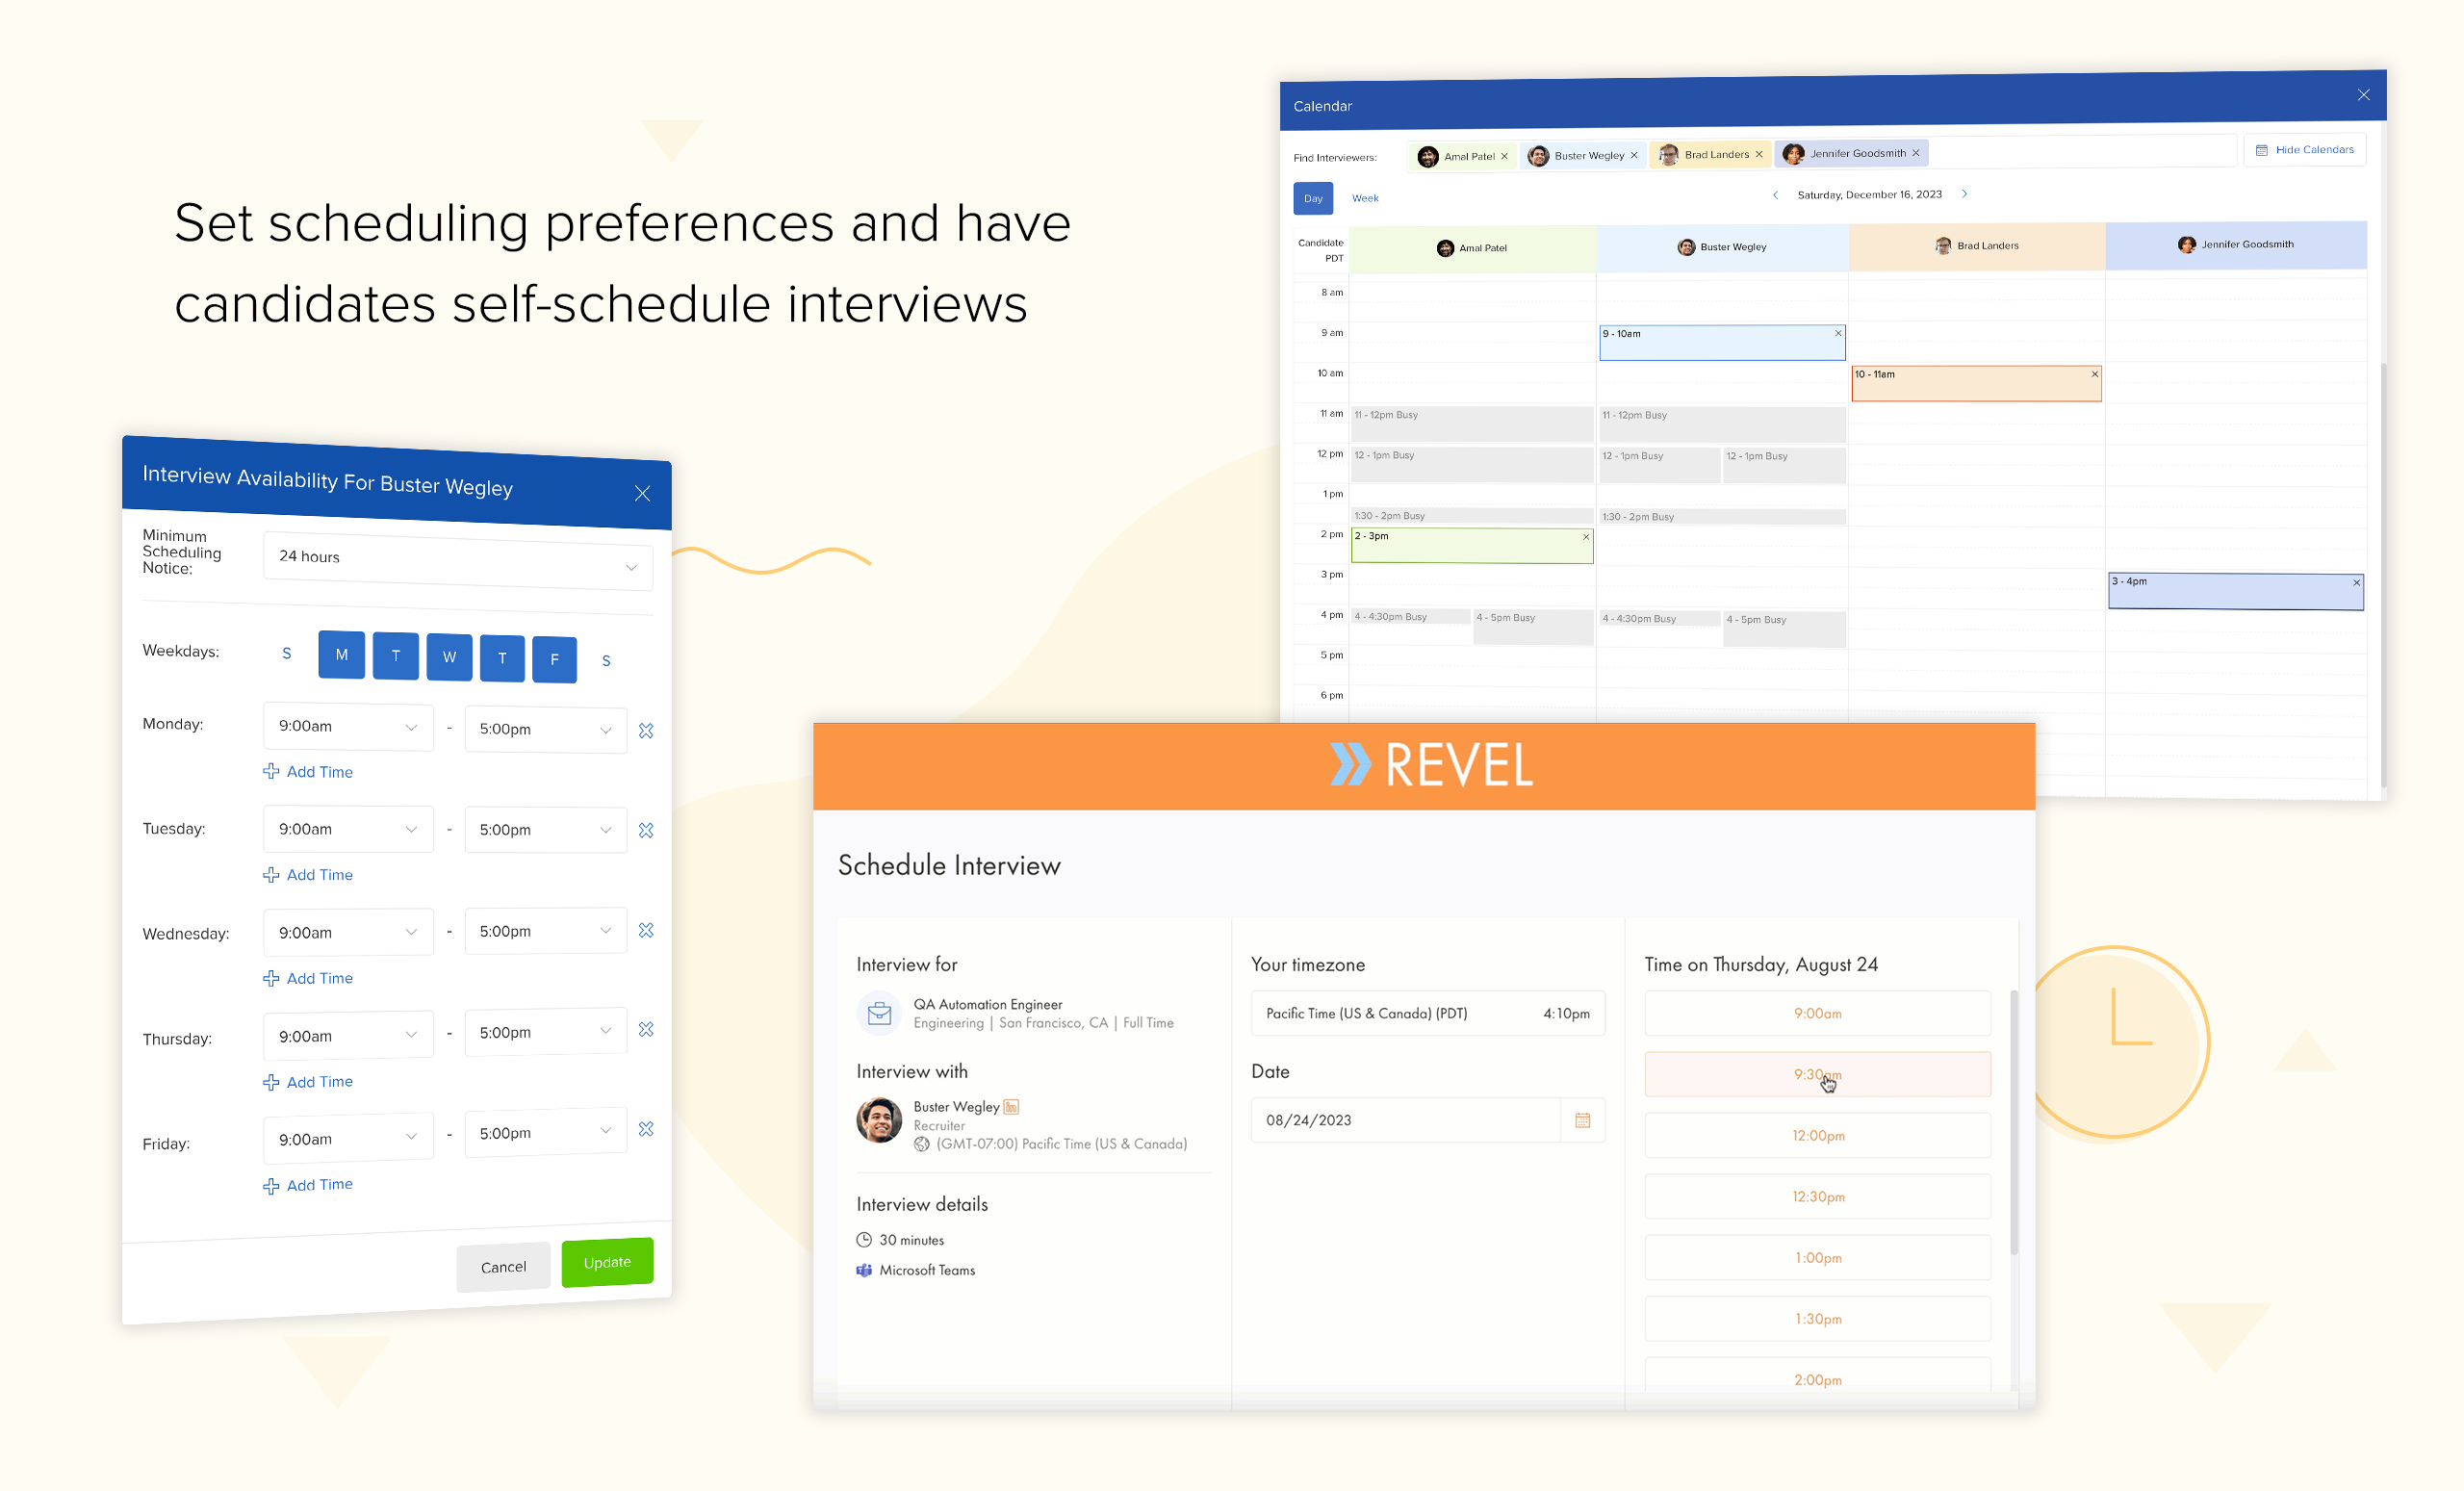 Set Scheduling preferences and have candidates self-schedule interviews
